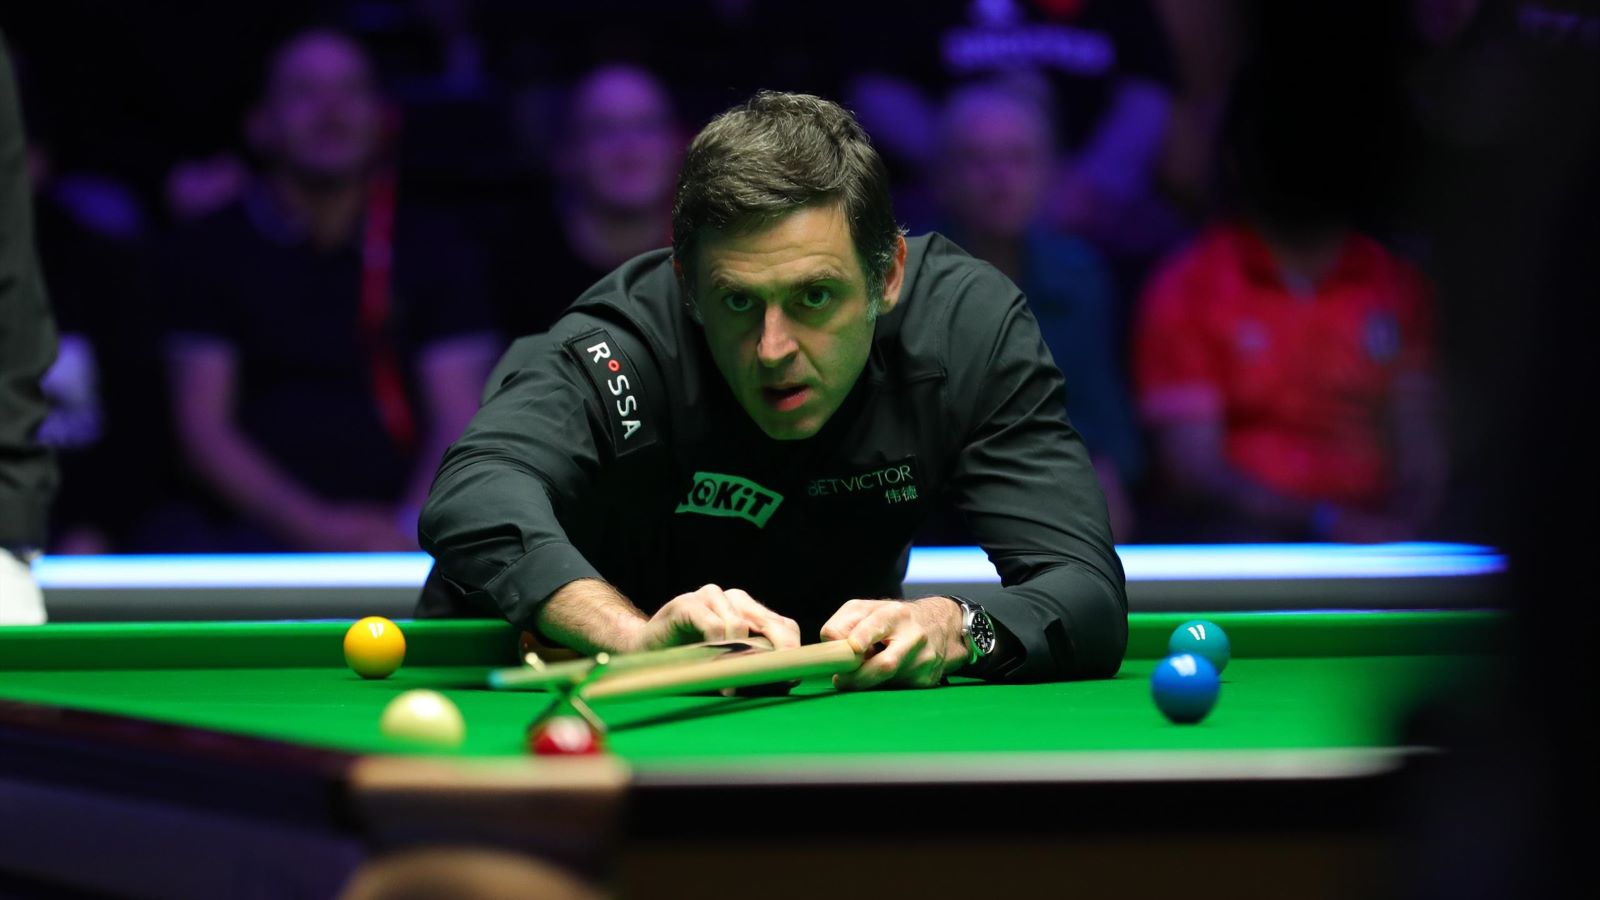 How to Watch 2022 Snooker World Championship Live Stream Online From Anywhere